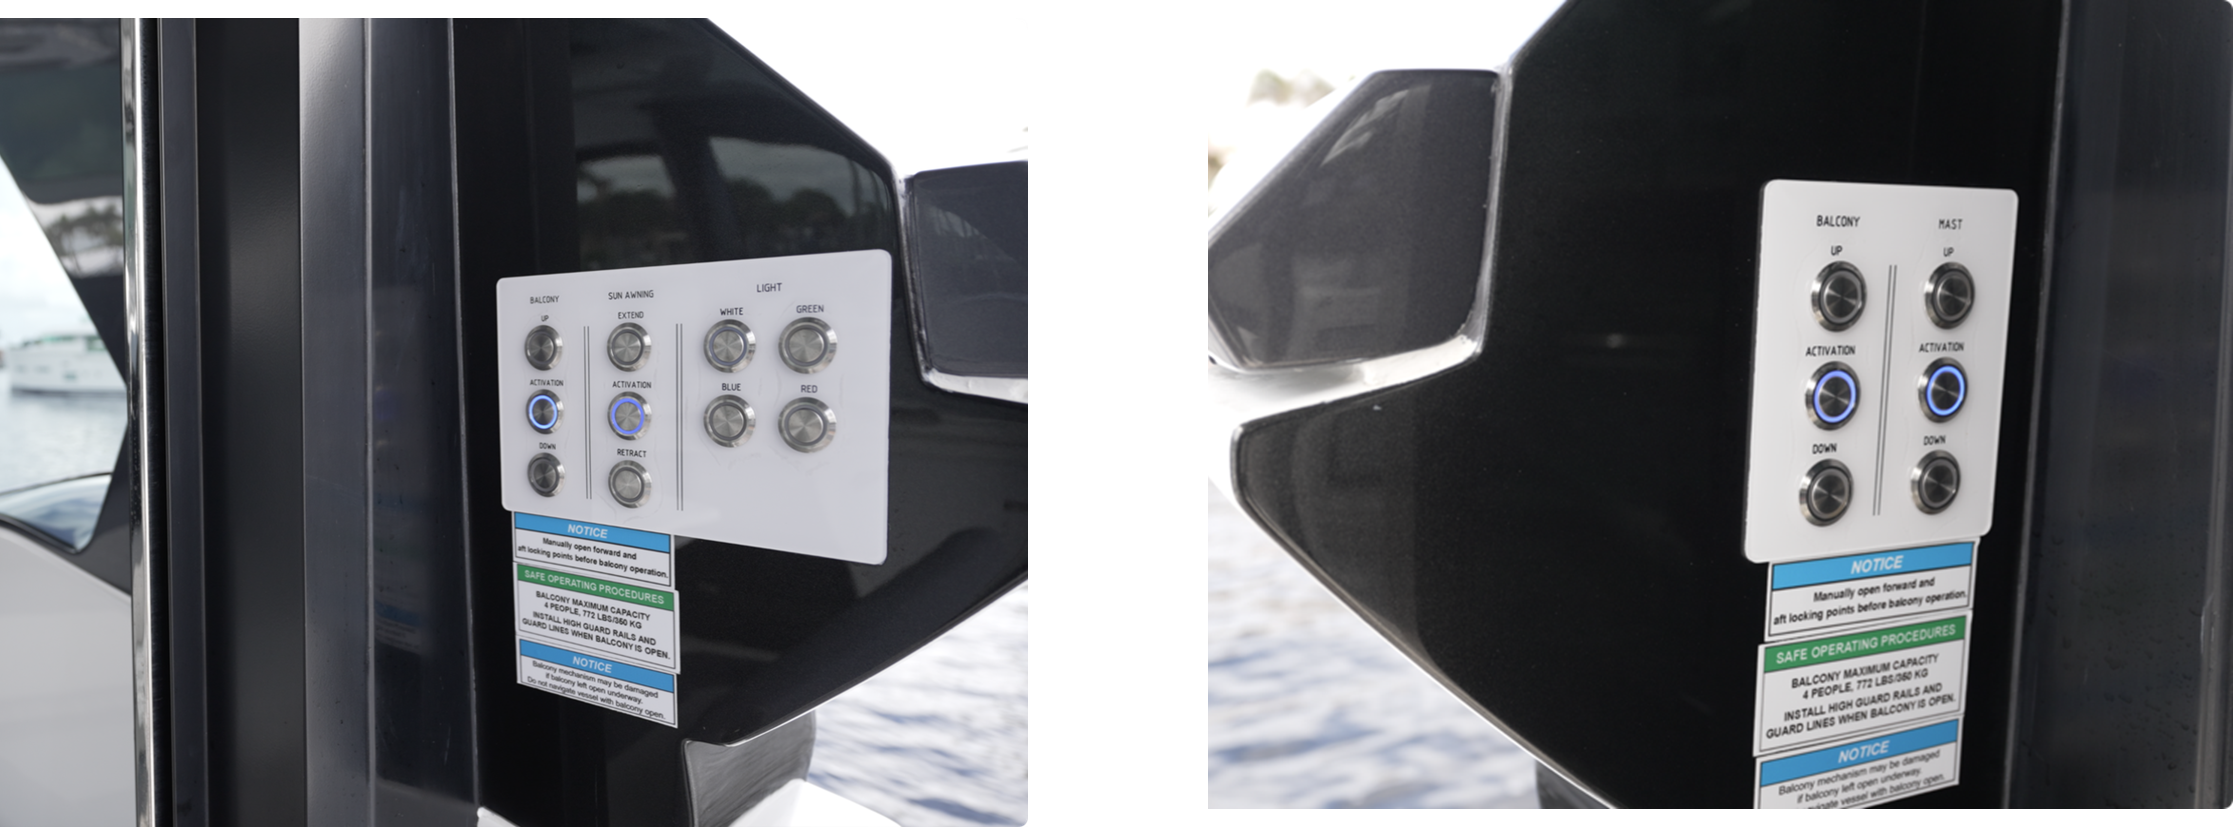 Galeon 435 GTO Cockpit control buttons for the balconies, sunshade, mast and exterior lighting